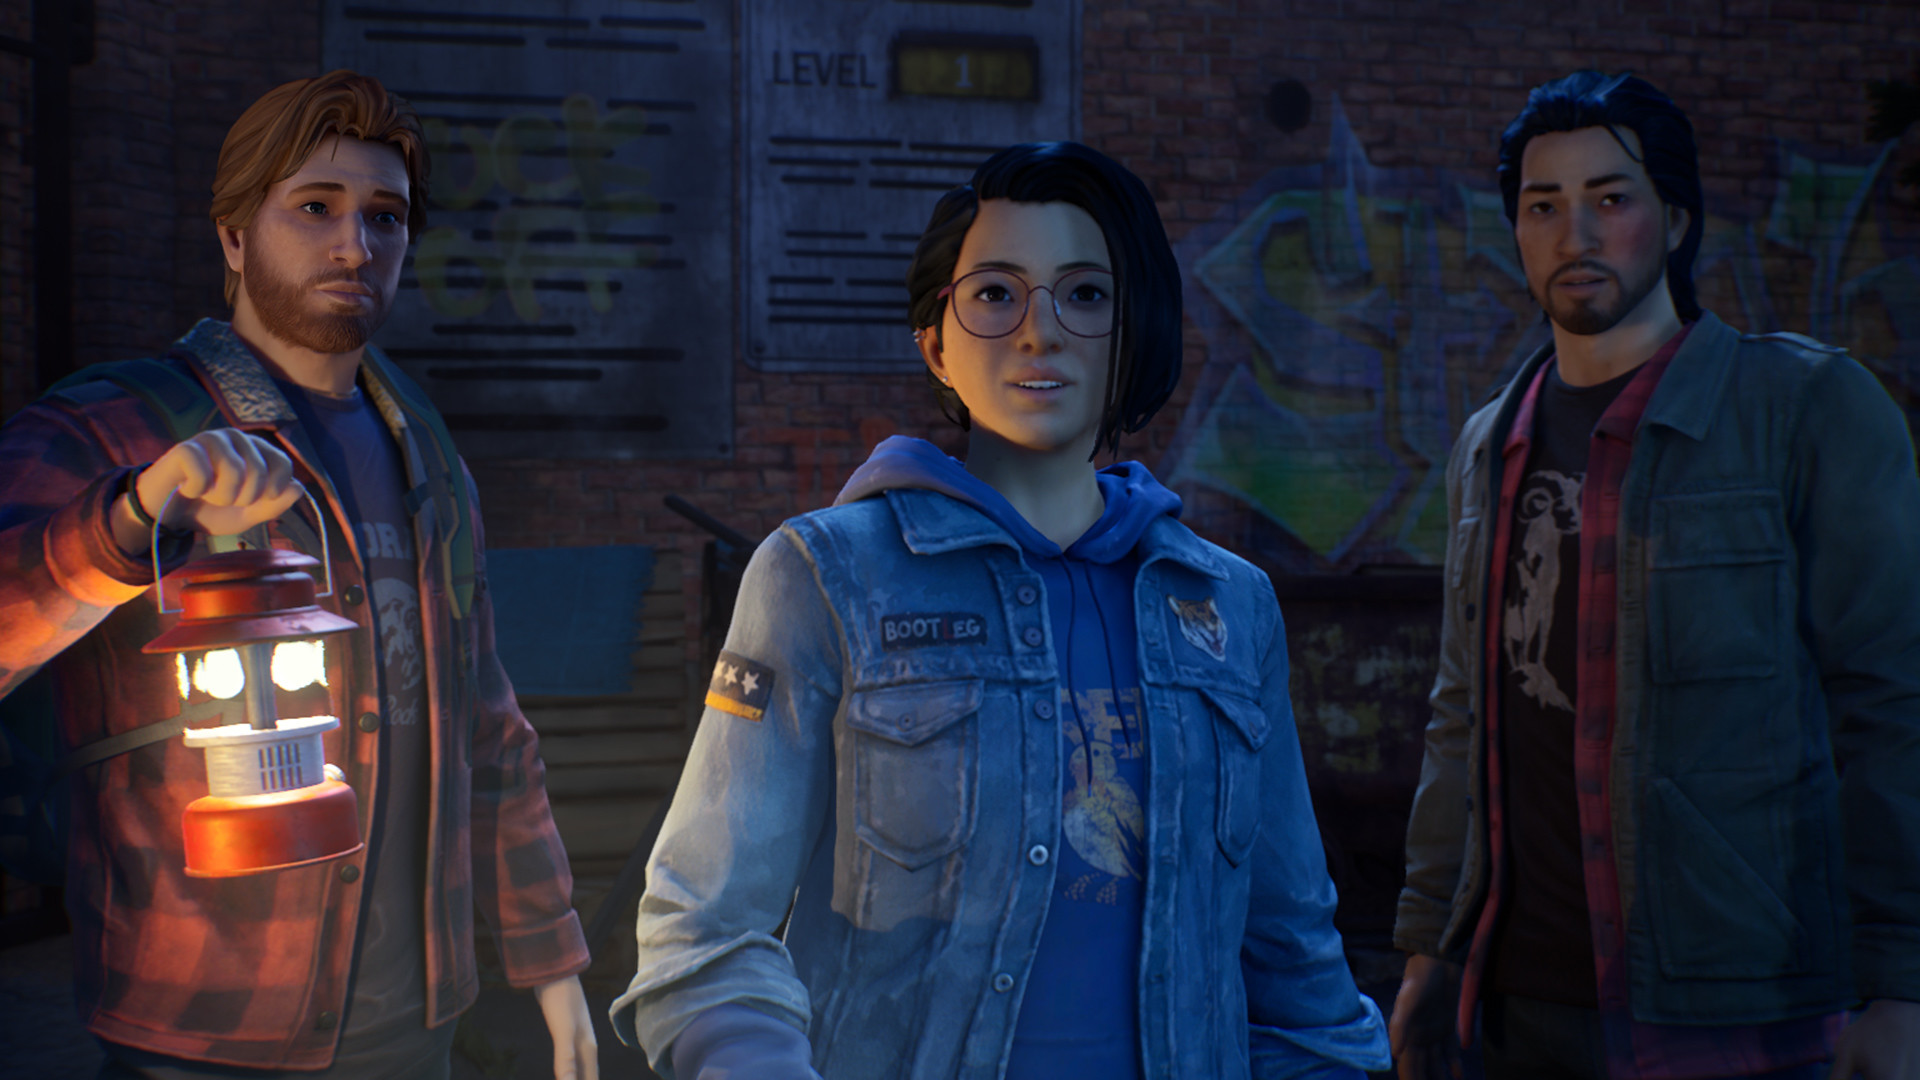 Life Is Strange: True Colors characters standing, looking at something, with one of them holding a lamp